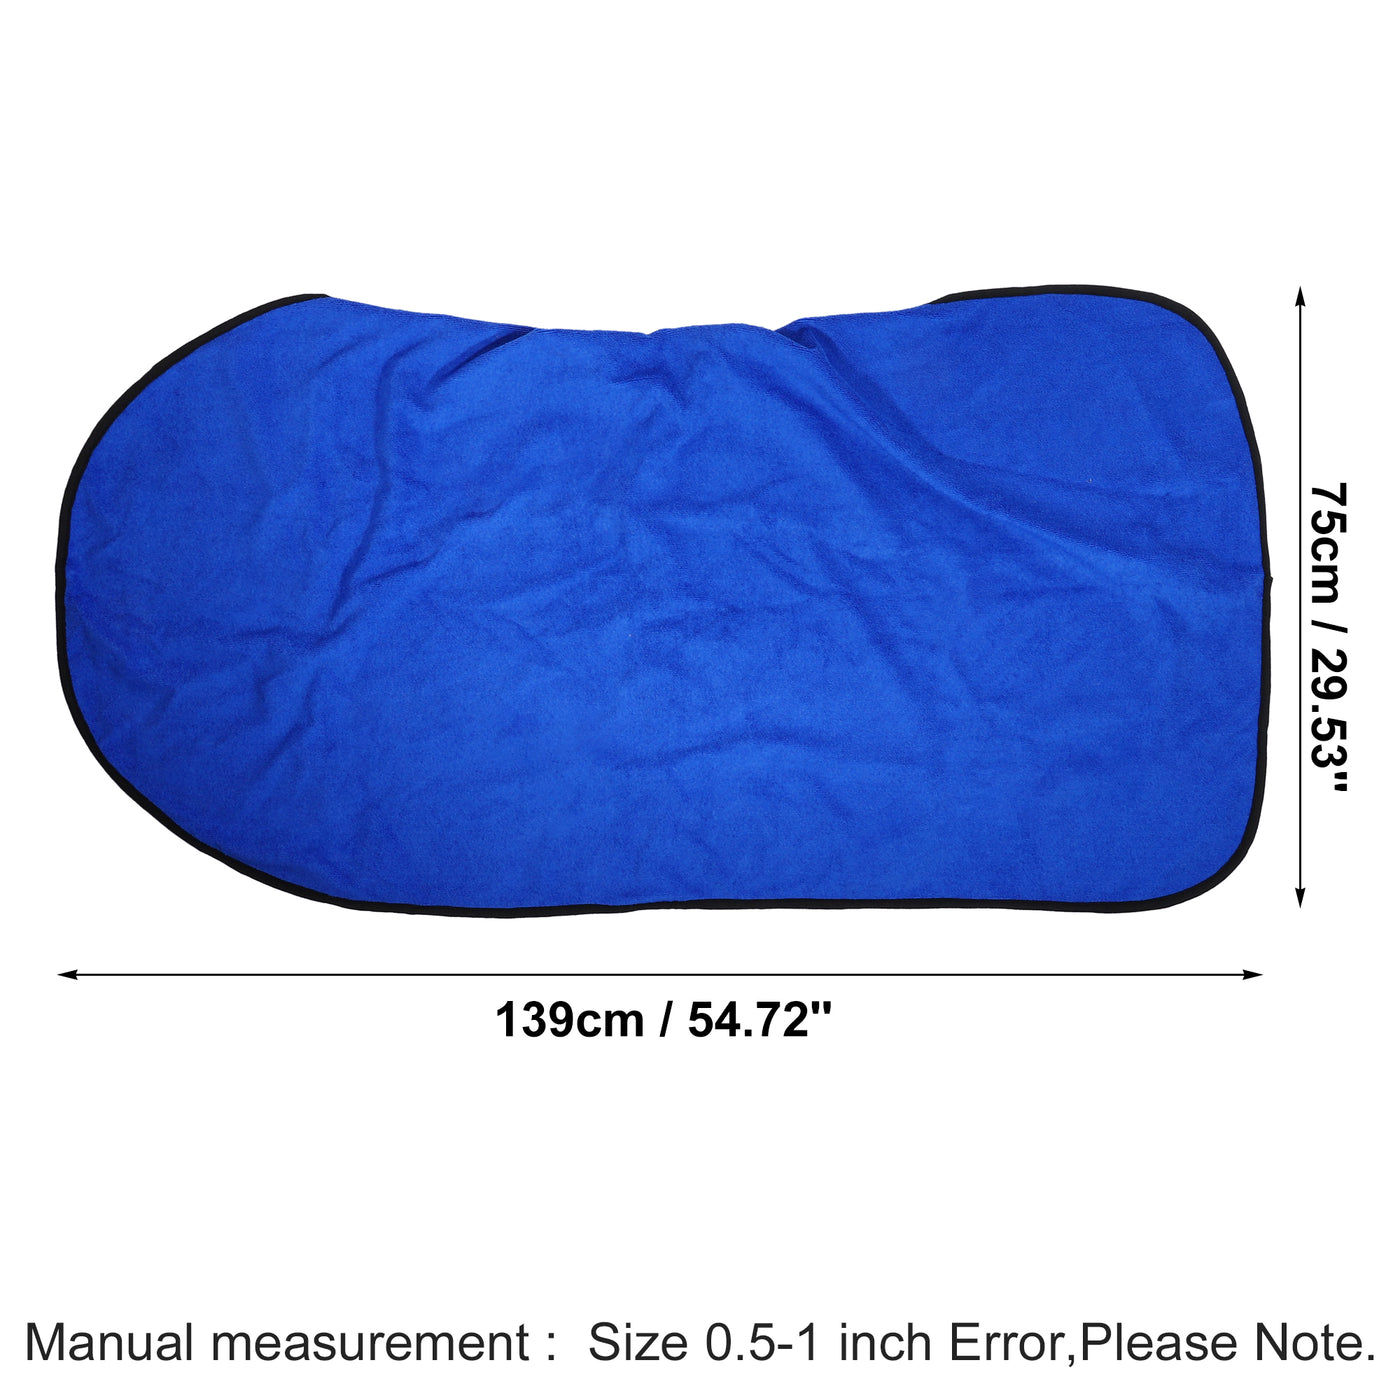 X AUTOHAUX Blue Universal Car Seat Cover Anti-Slip Towel Seat Protector Pad for Car Trucks SUV